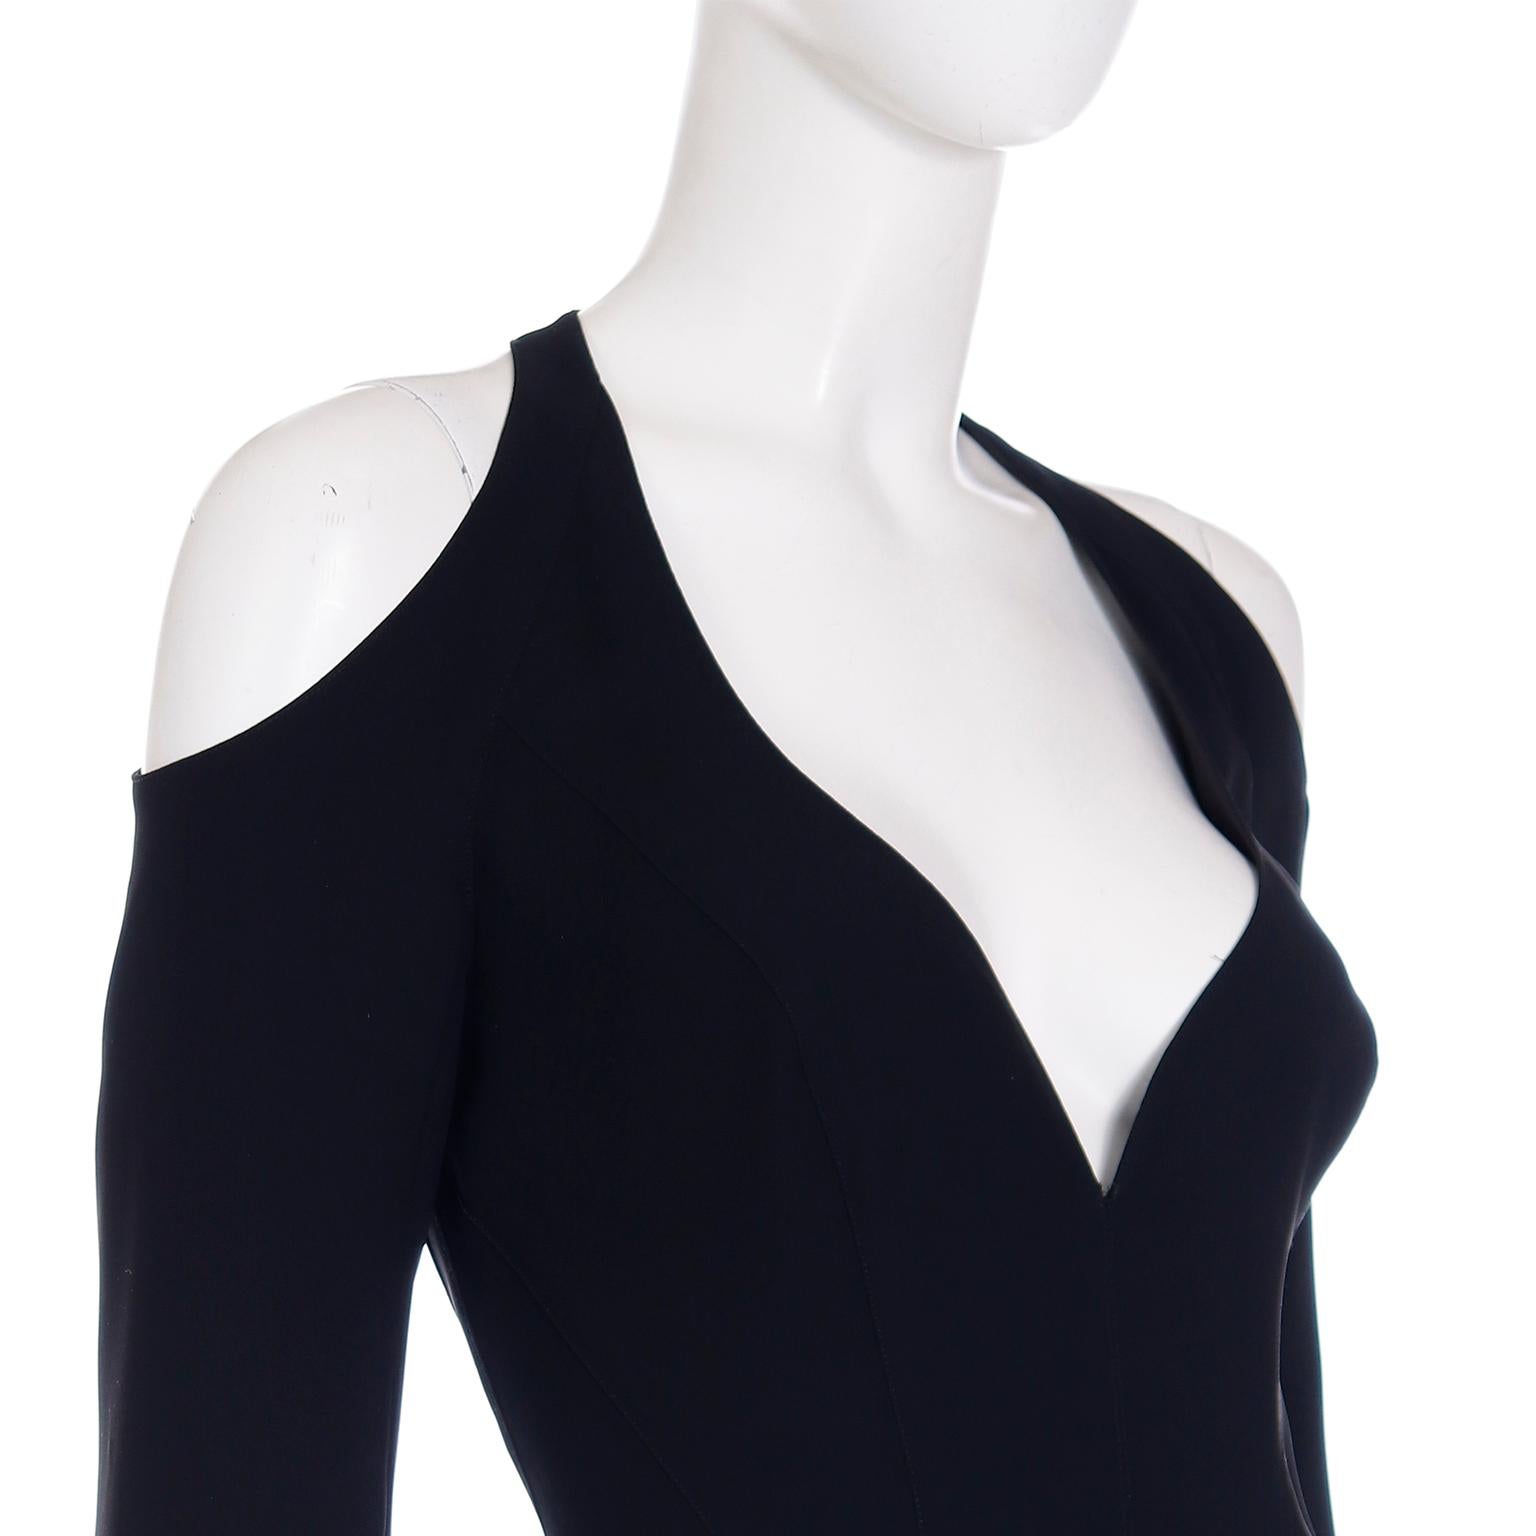 Thierry Mugler 2000 Black Cold Shoulder Evening Dress Samantha Sex and The City For Sale 3